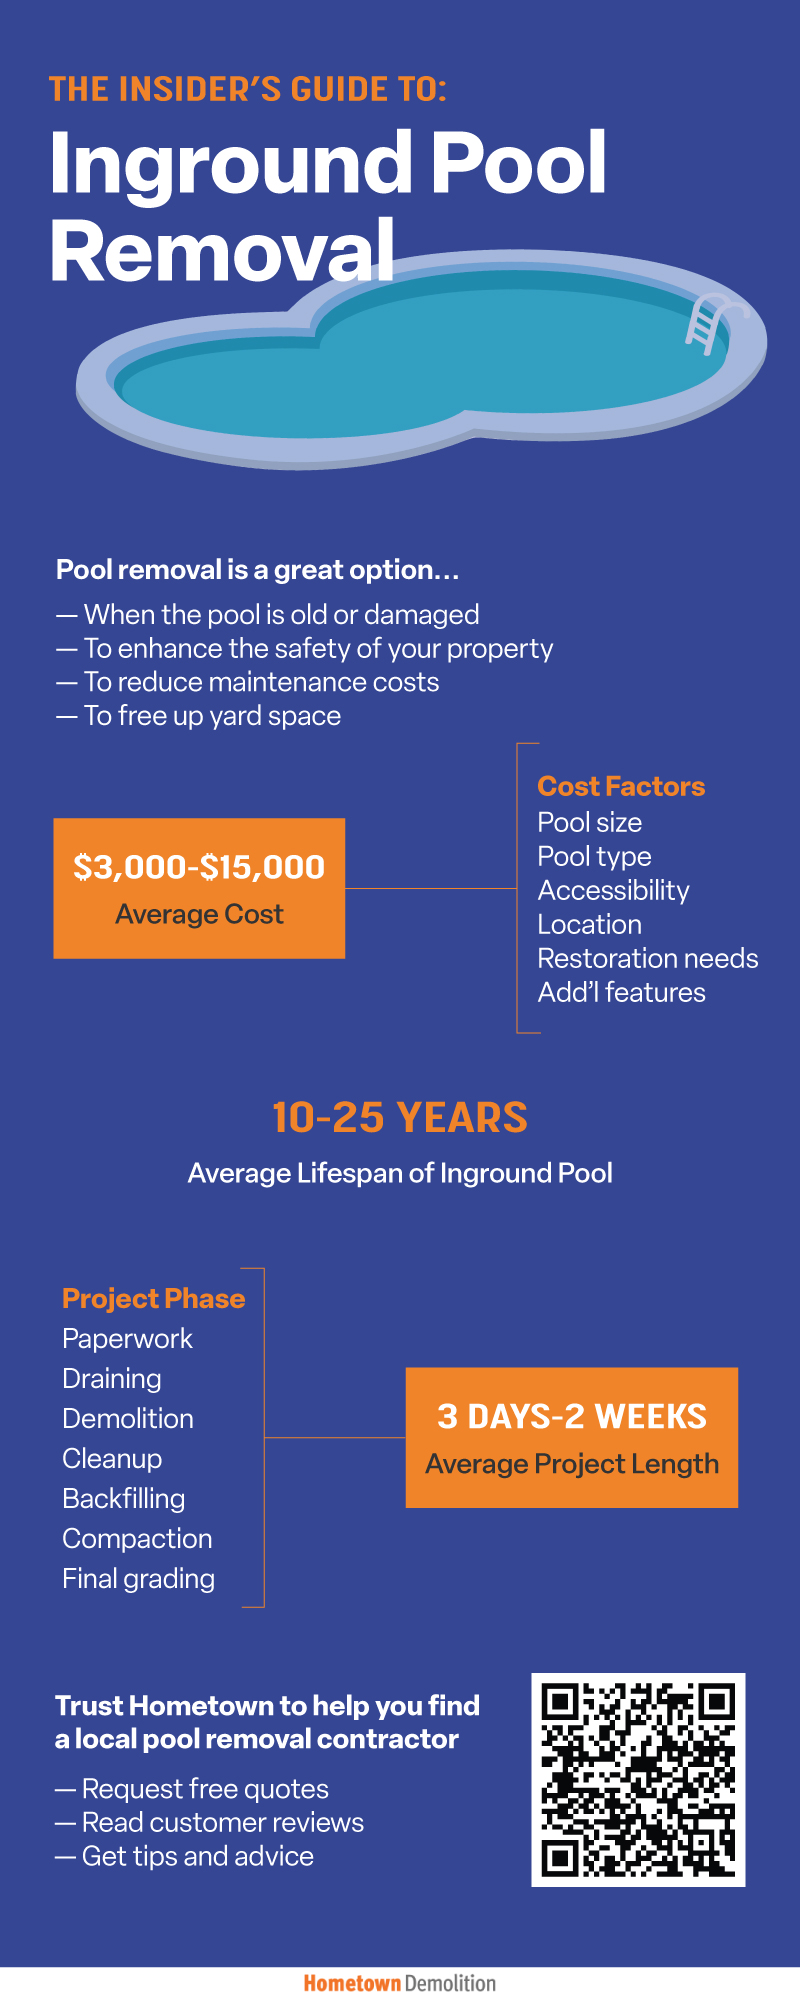 guide to inground pool removal infographic